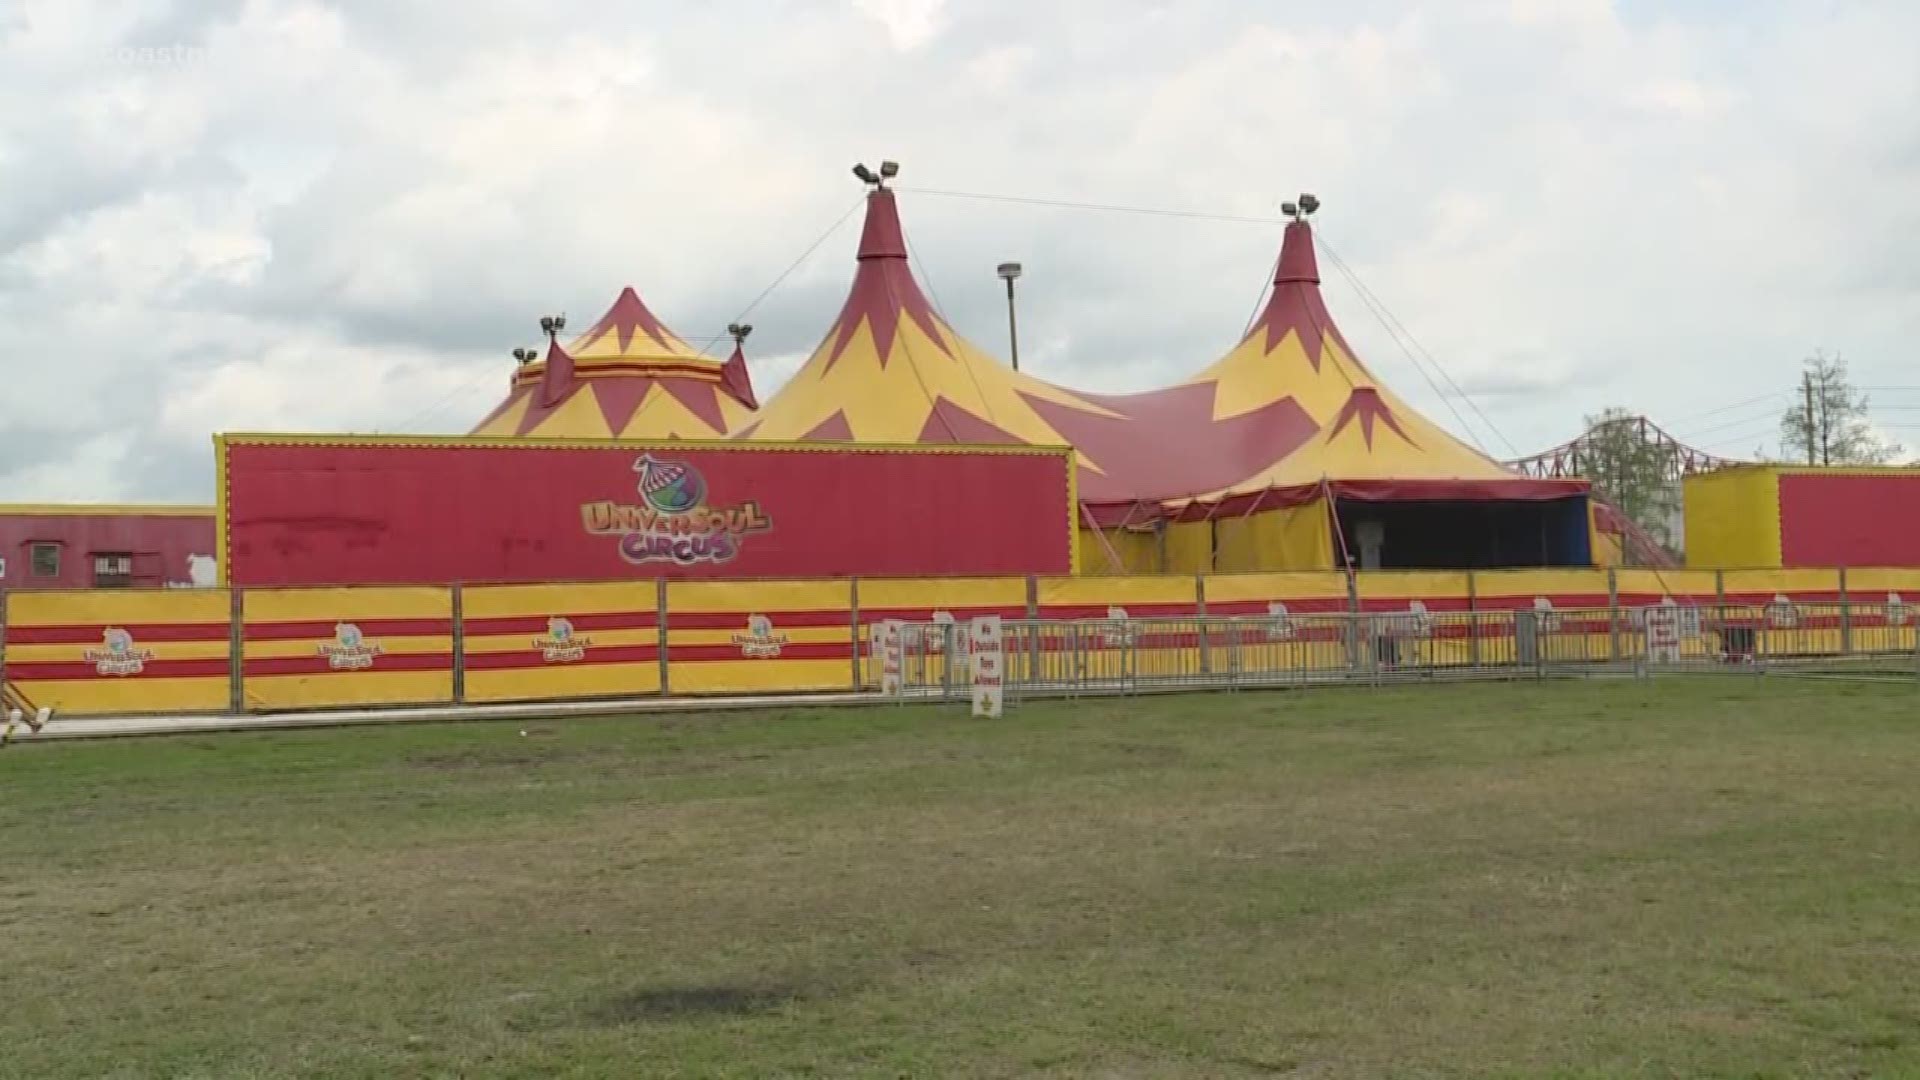 UniverSoul Circus brings fun, adventure for the whole family by ...